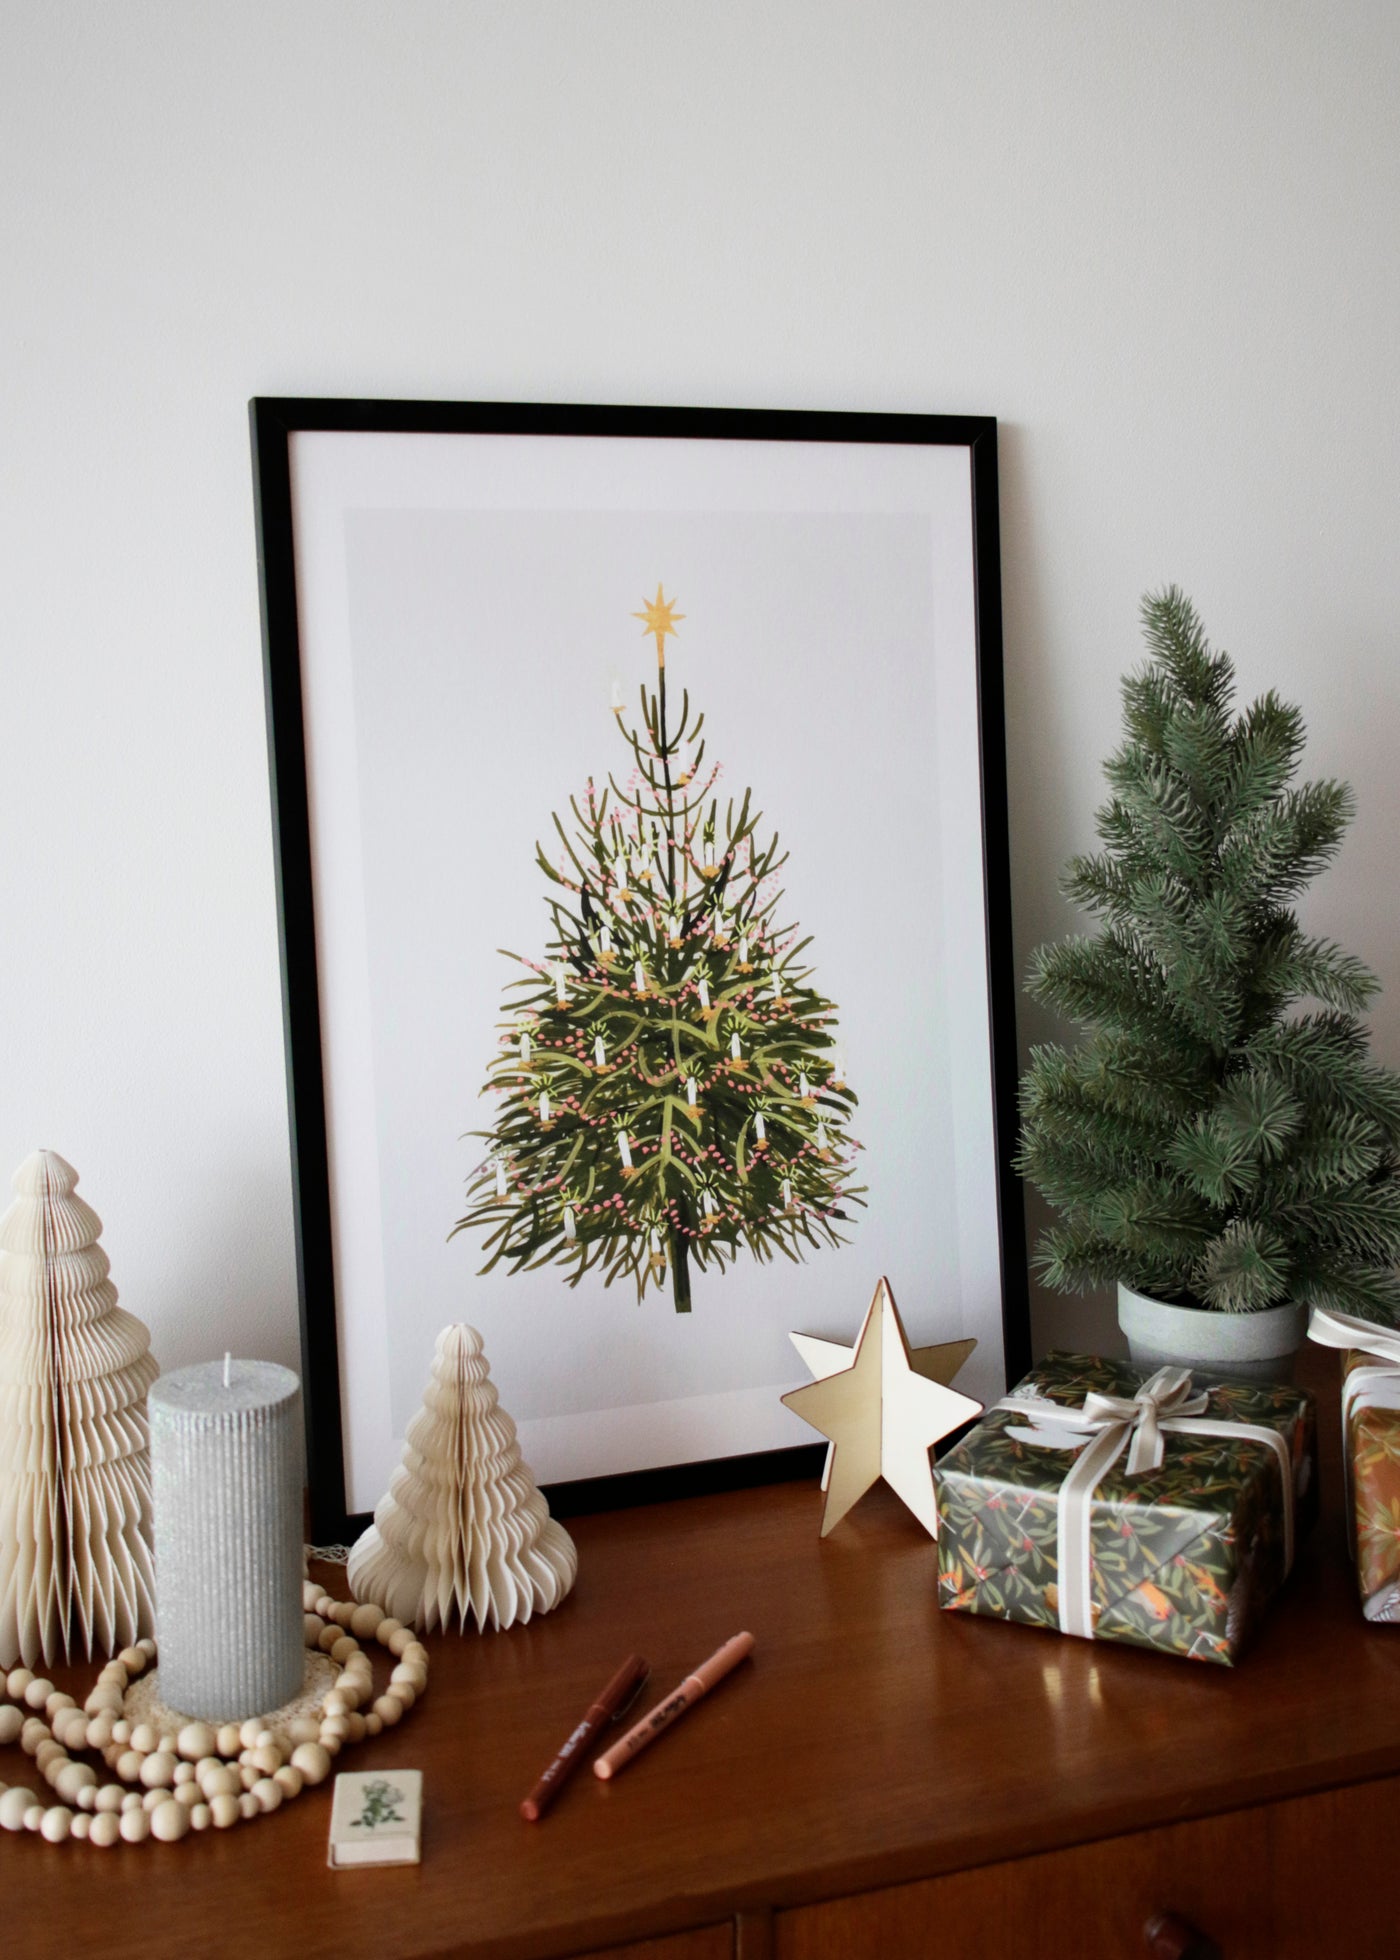 Illustrated Christmas Wall art Print of a vintage-style Christmas tree, Made in the UK.